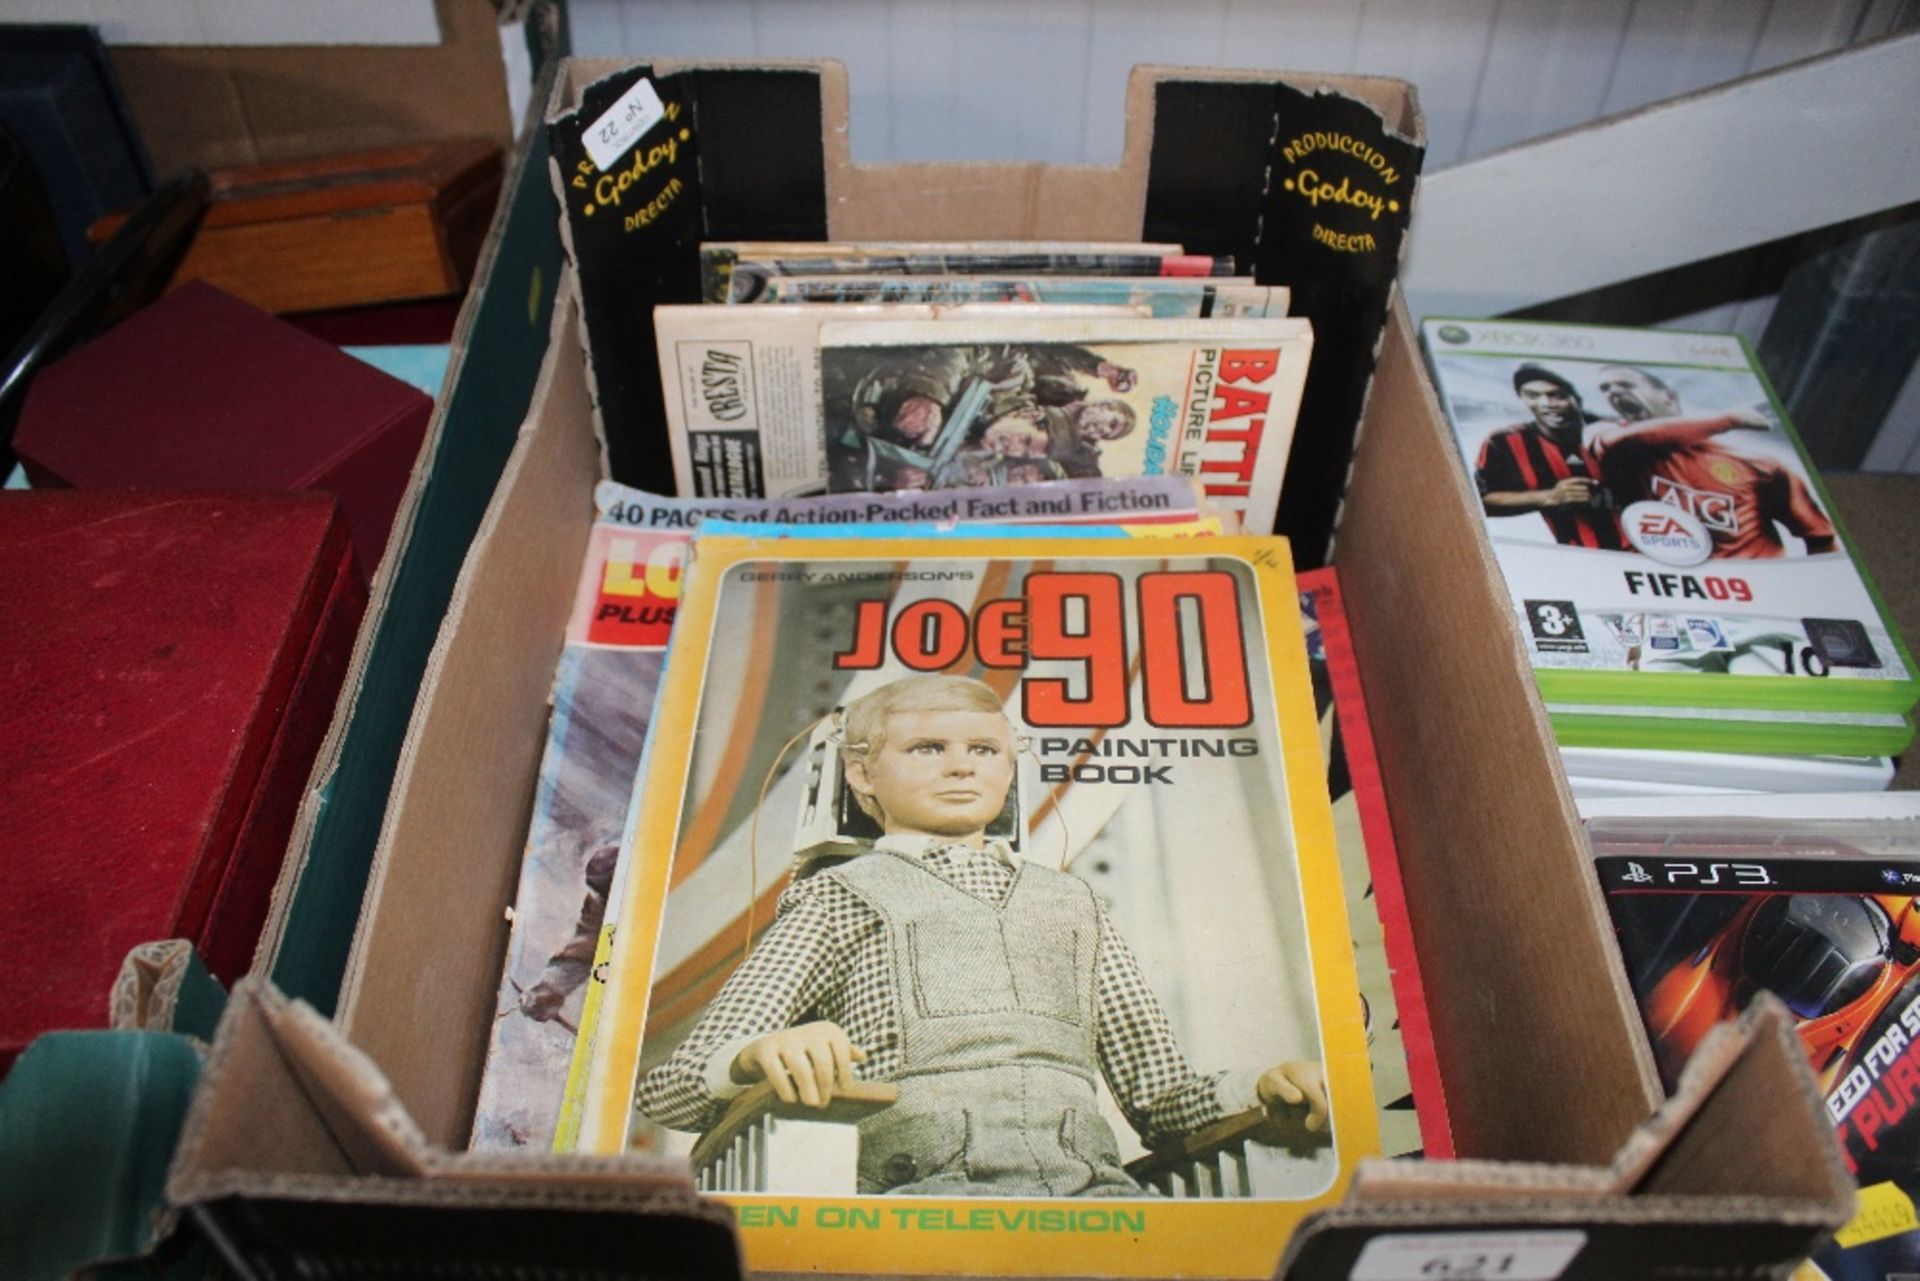 A box of comics and painting book